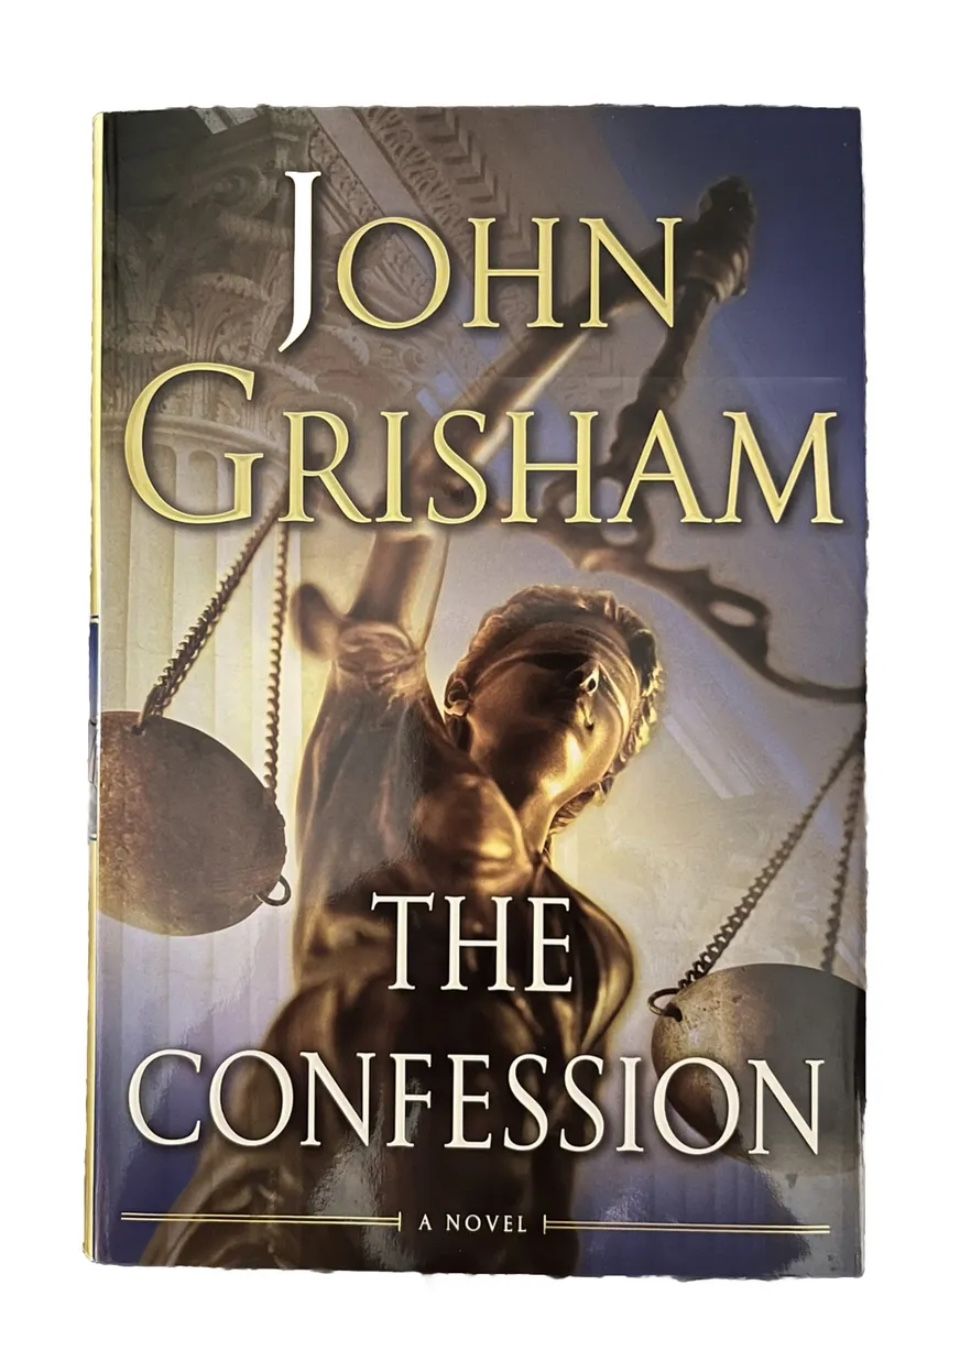 The Confession : A Novel by John Grisham (2010, Hardcover) First Edition Book